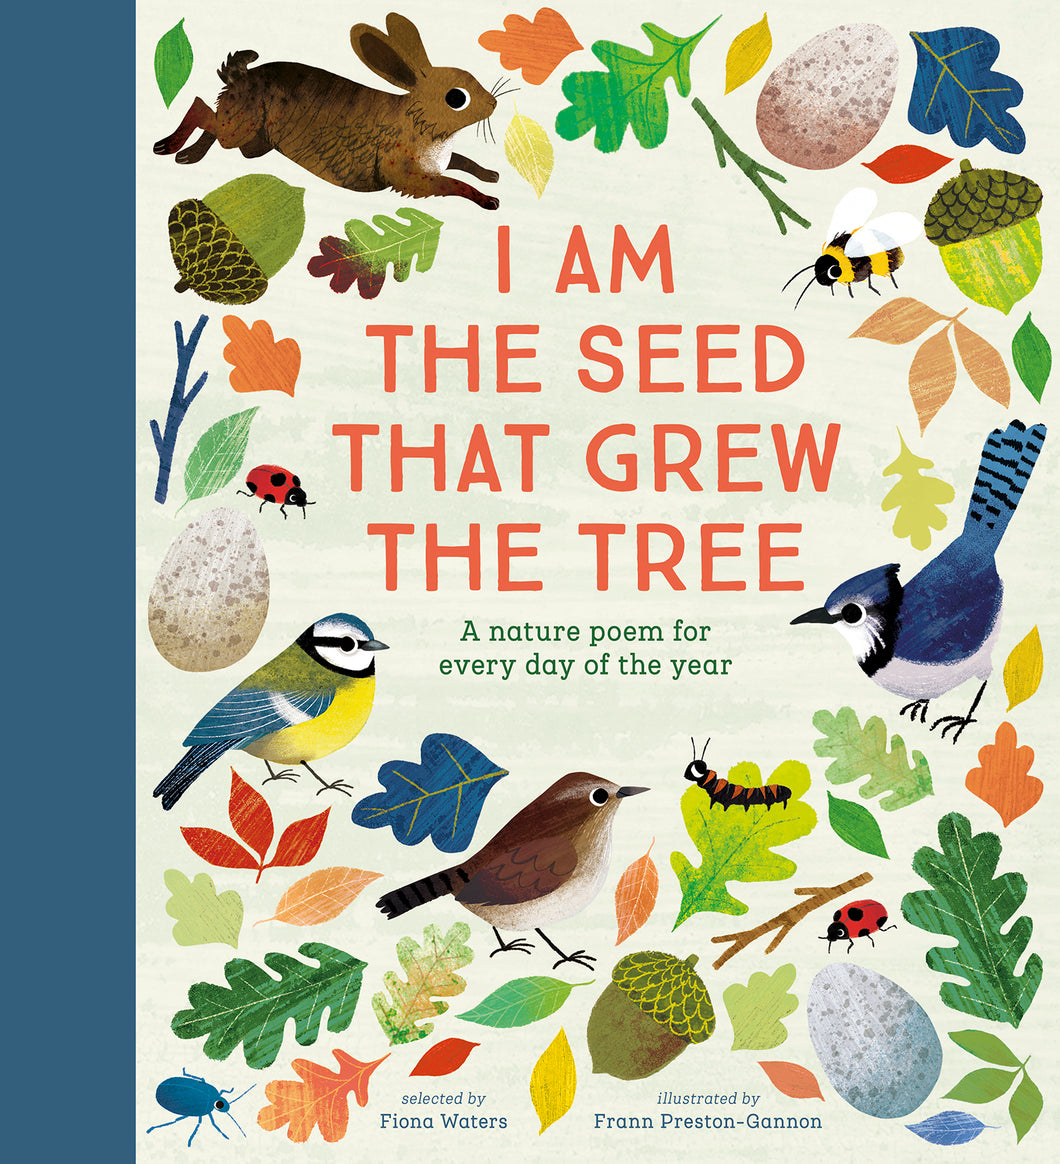 I Am the Seed That Grew the Tree – A Nature Poem for Every Day of the Year